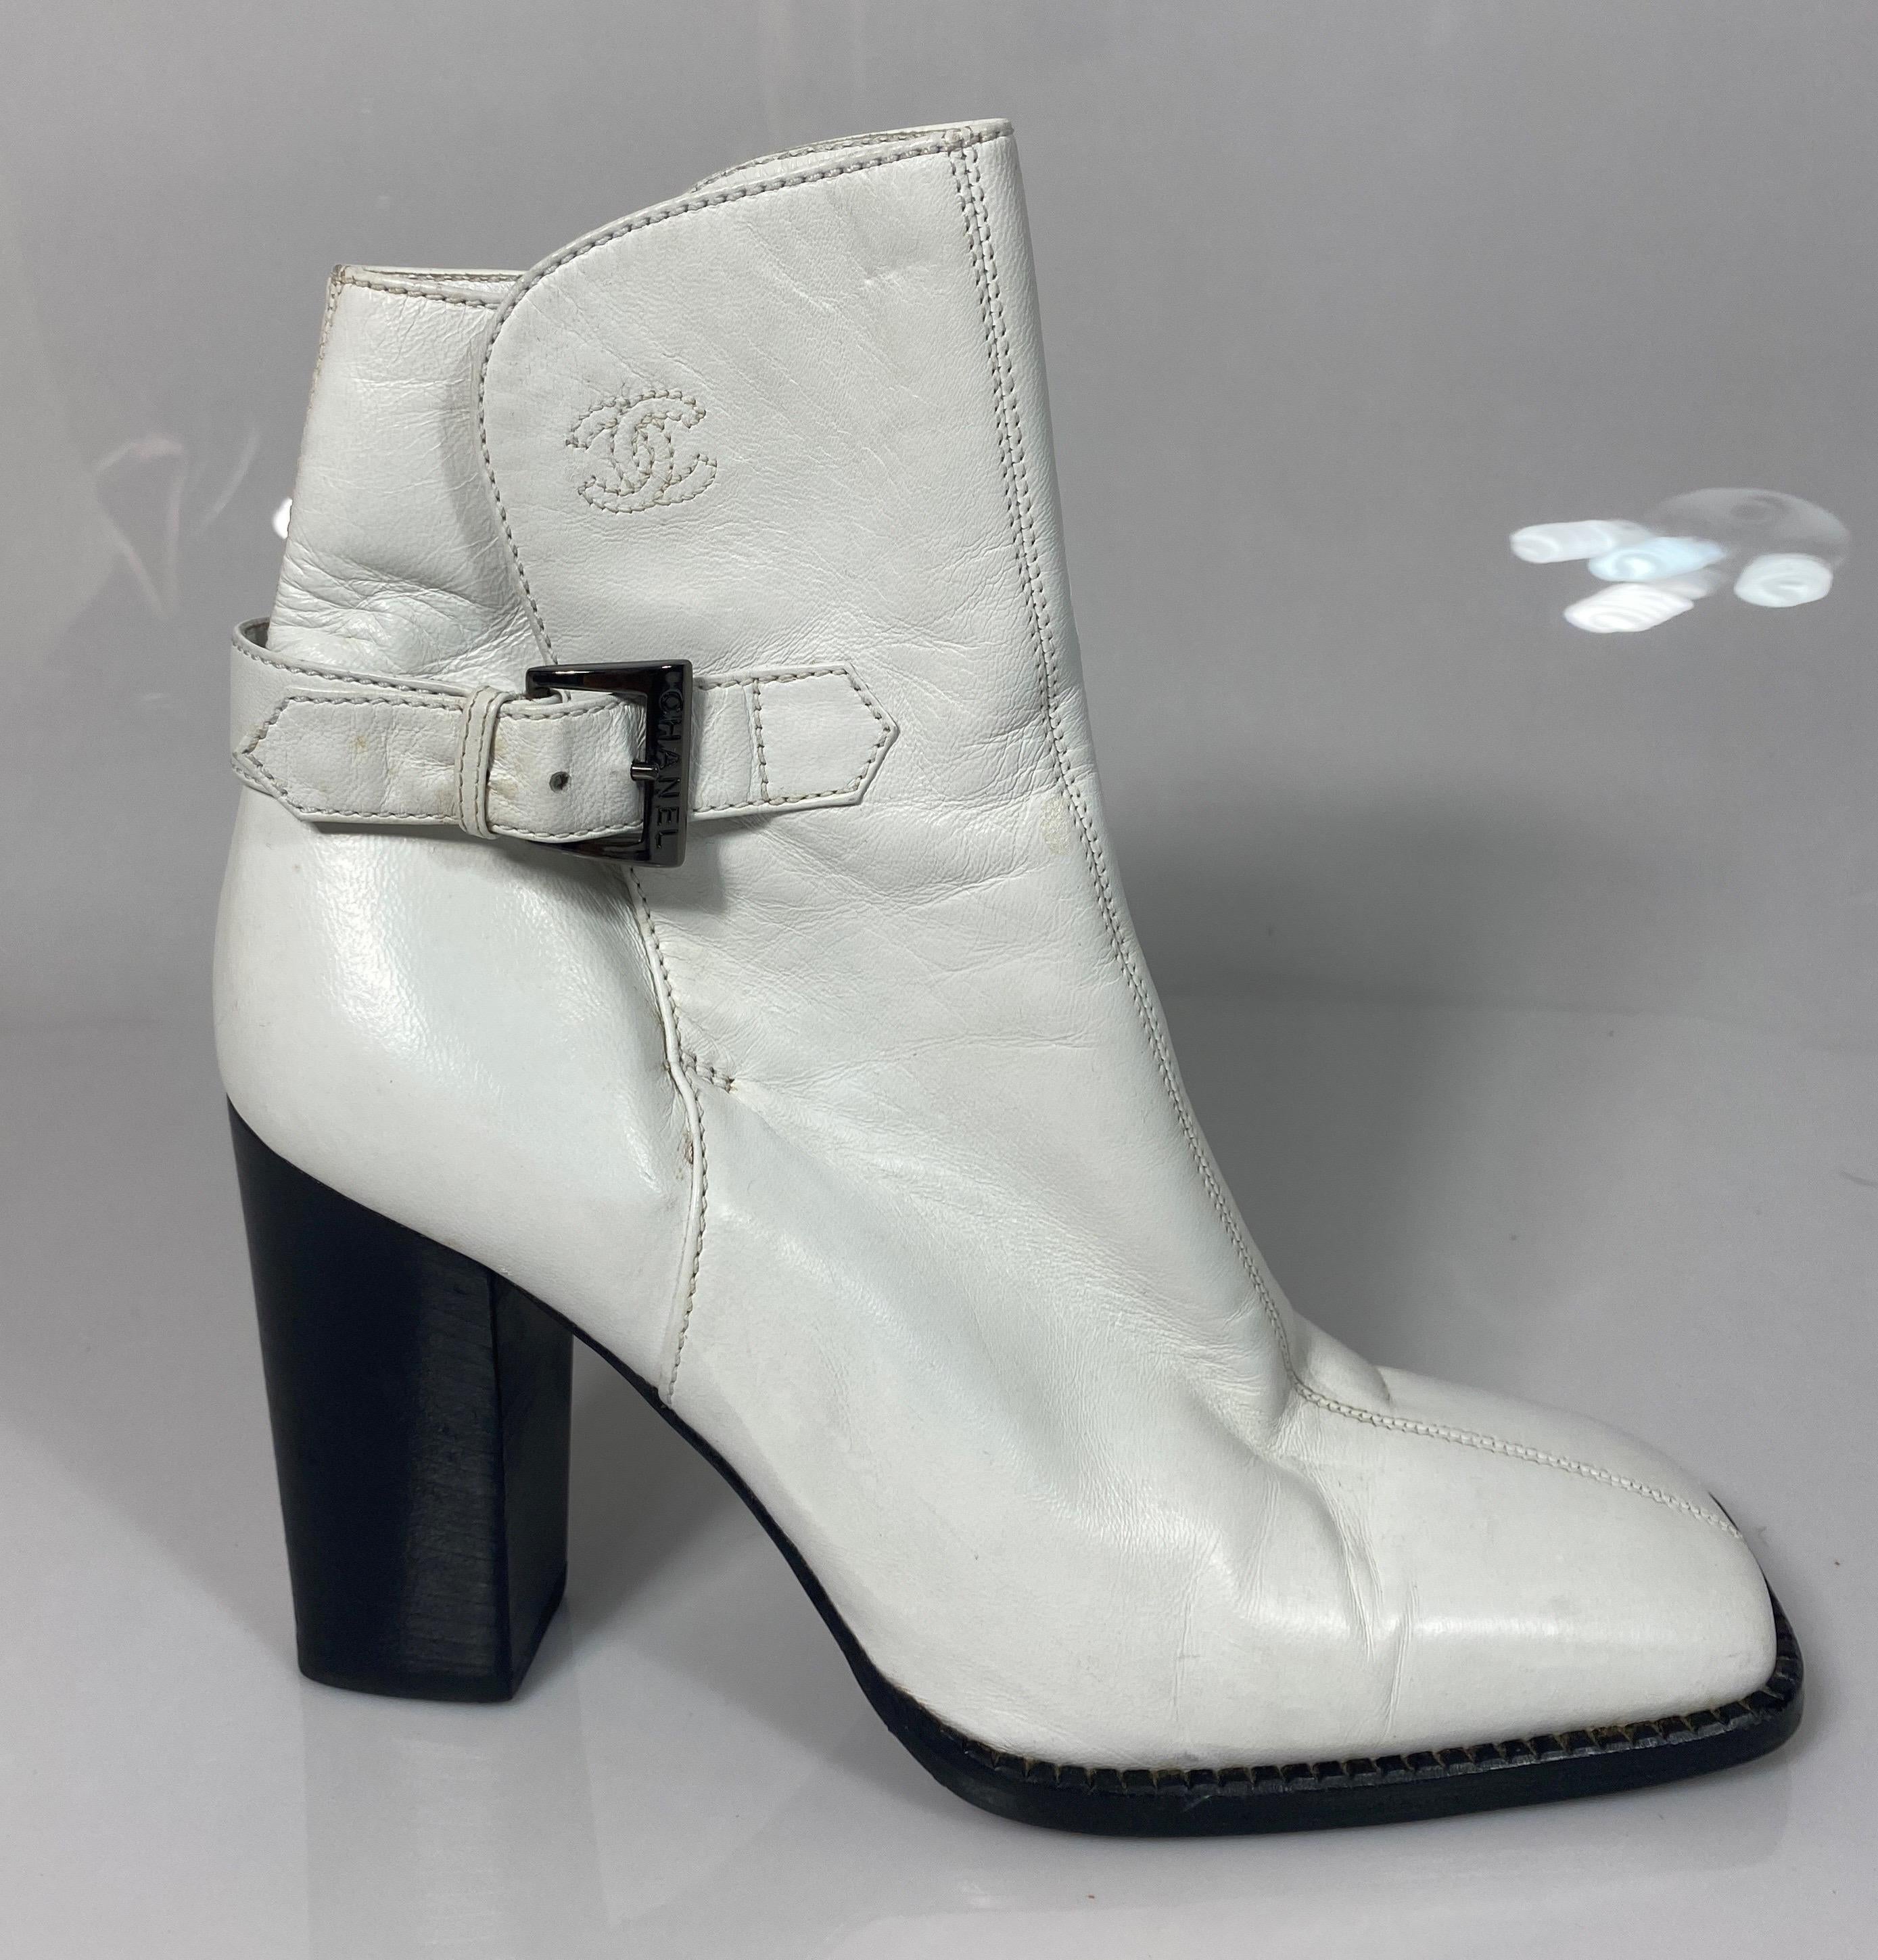 Chanel White Leather Chunky Wood Stack Heel Short Boot -Size 36.5. This rare Chanel White Bootie is as described below:
Square toe box
3.75” Heel Height
1.25” X 1.5” Wood stack heel
1” wide leather strap with Chanel buckle around ankle 
Leather